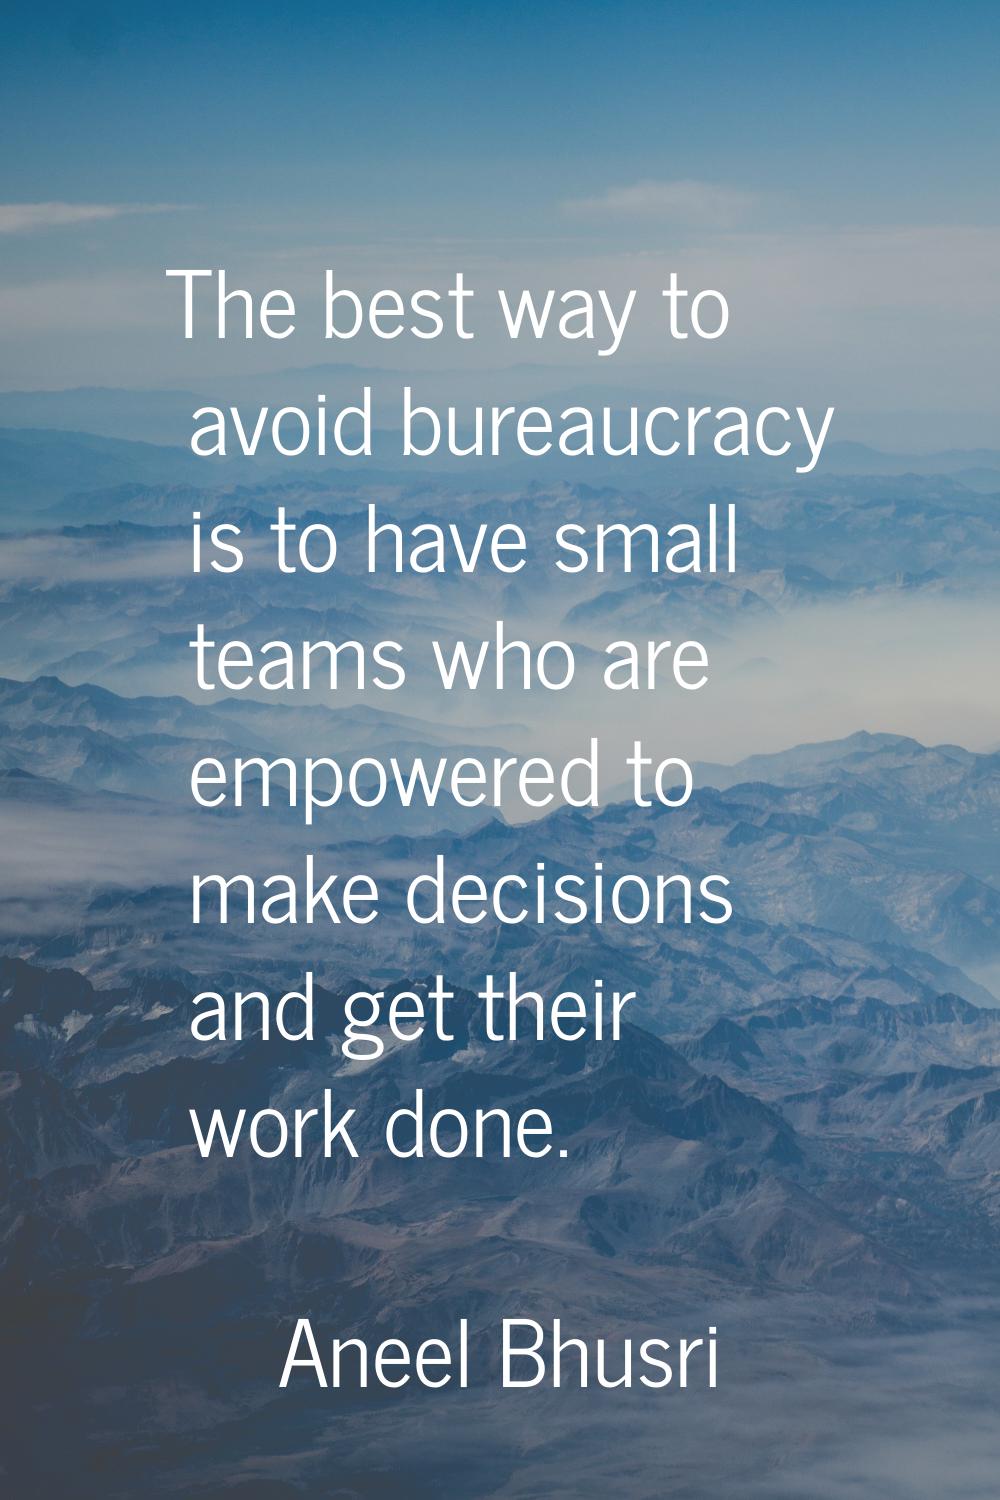 The best way to avoid bureaucracy is to have small teams who are empowered to make decisions and ge